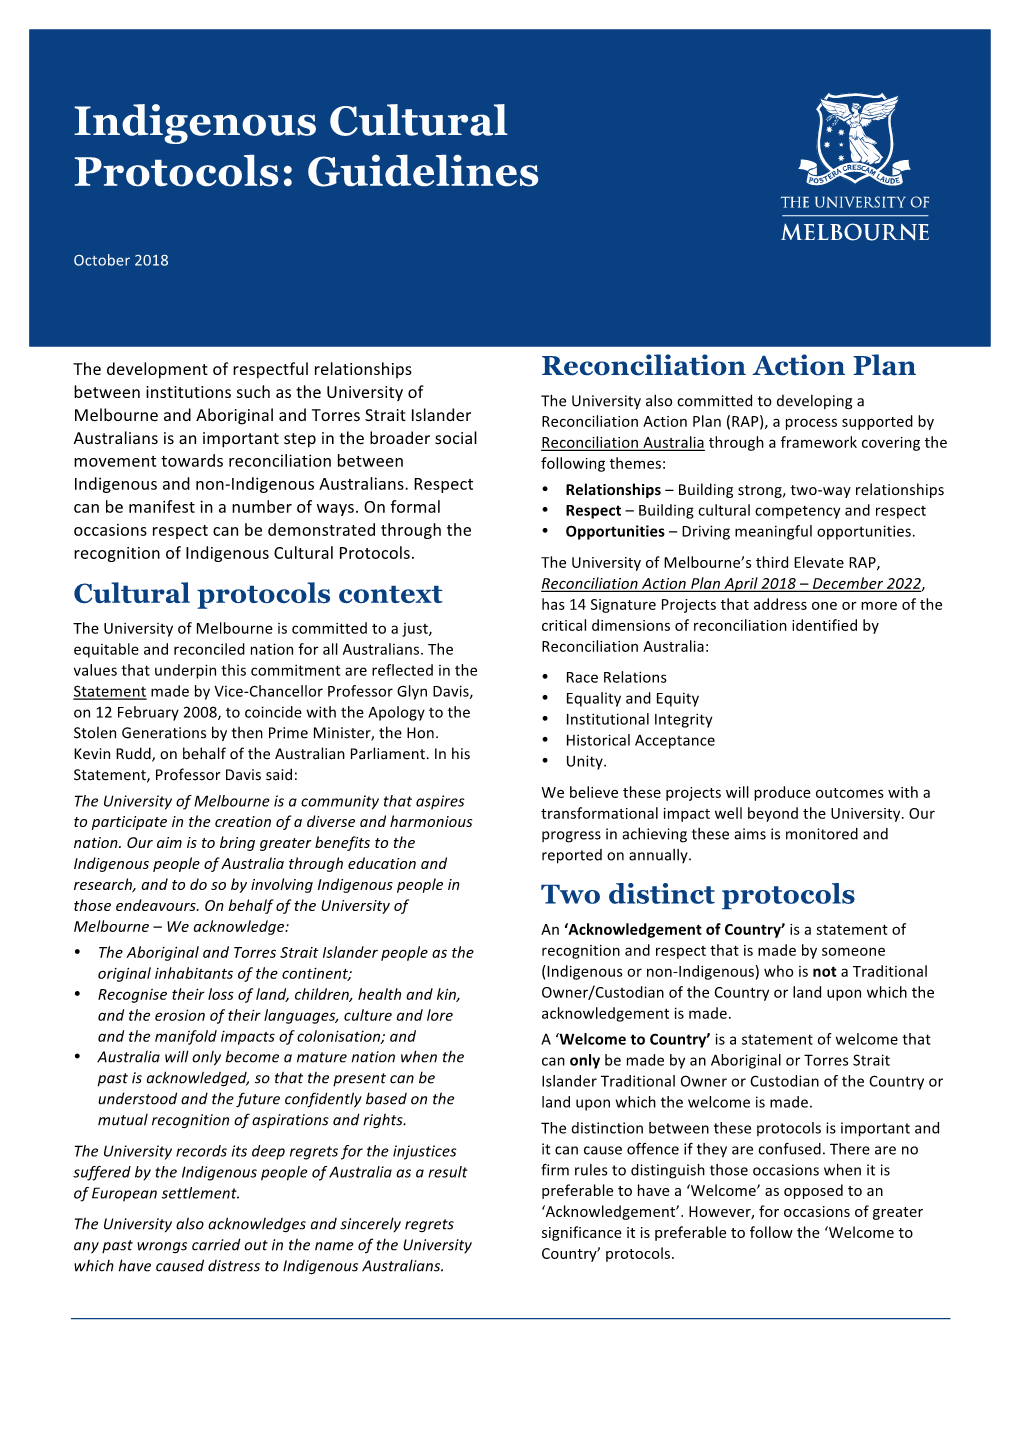 Indigenous Cultural Protocols: Guidelines